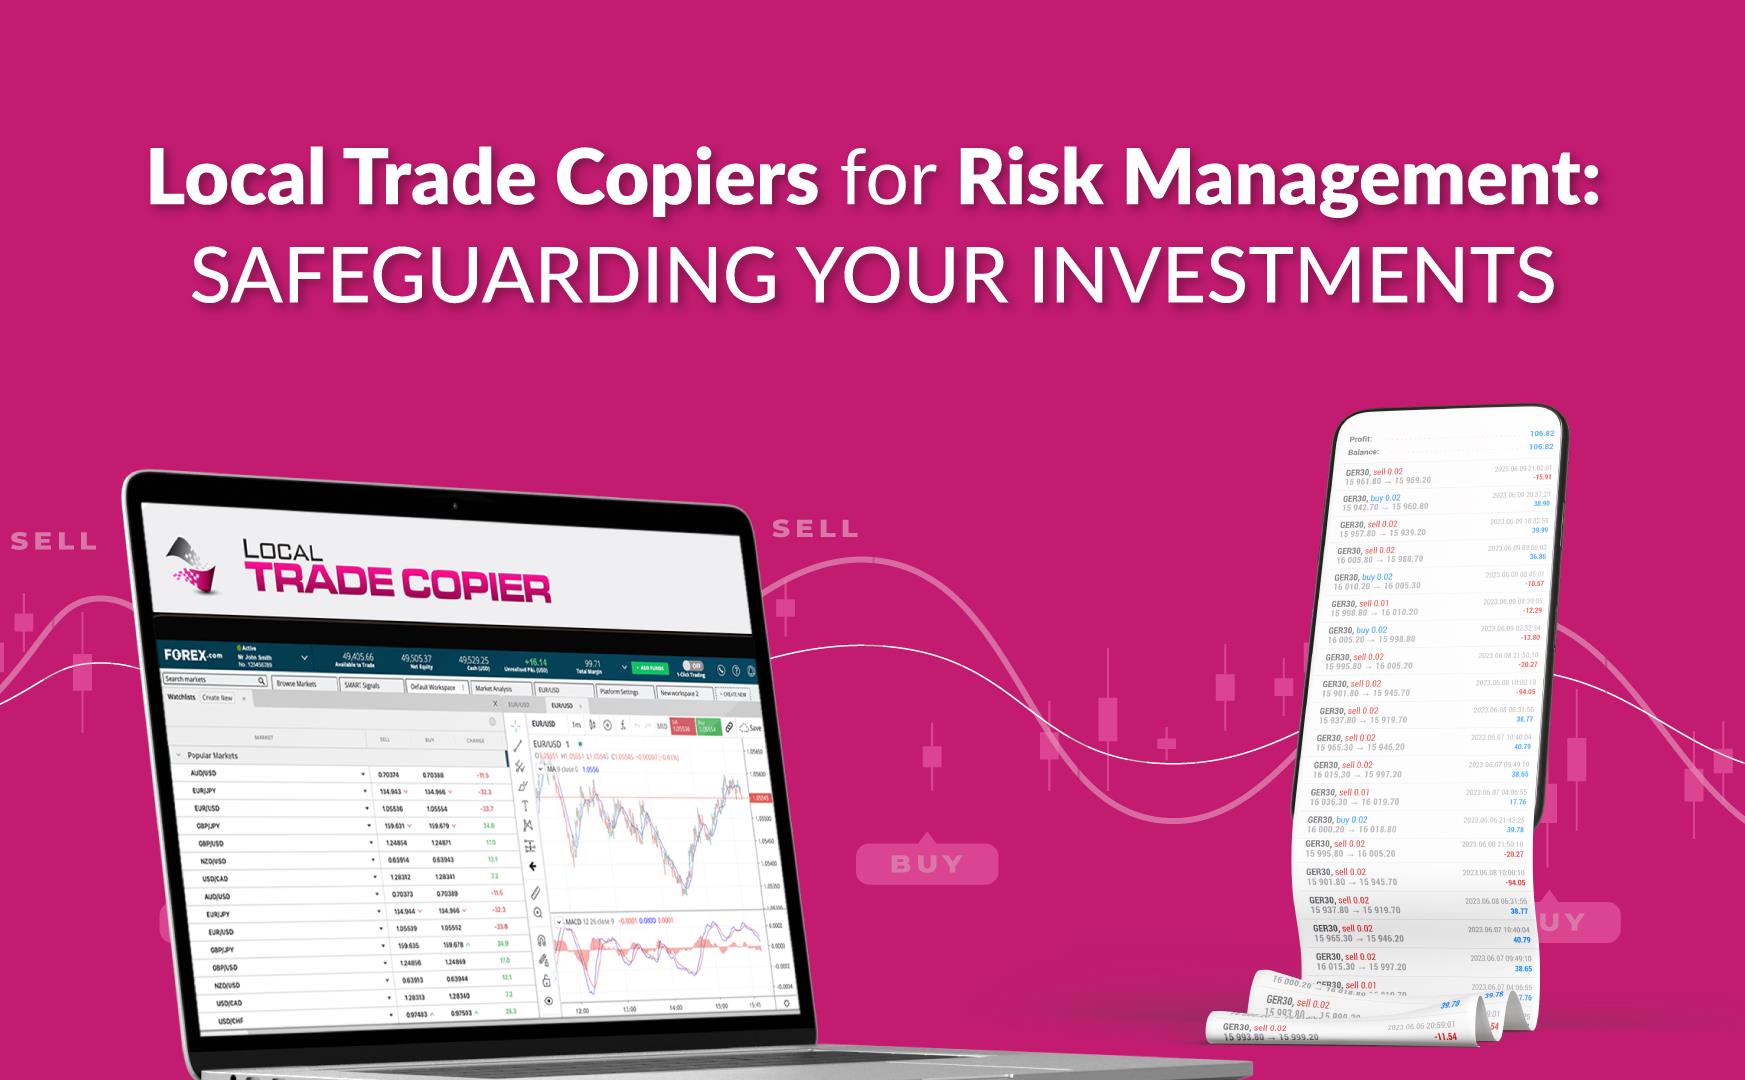 Local Trade Copiers for Risk Management: Safeguarding Your Investments